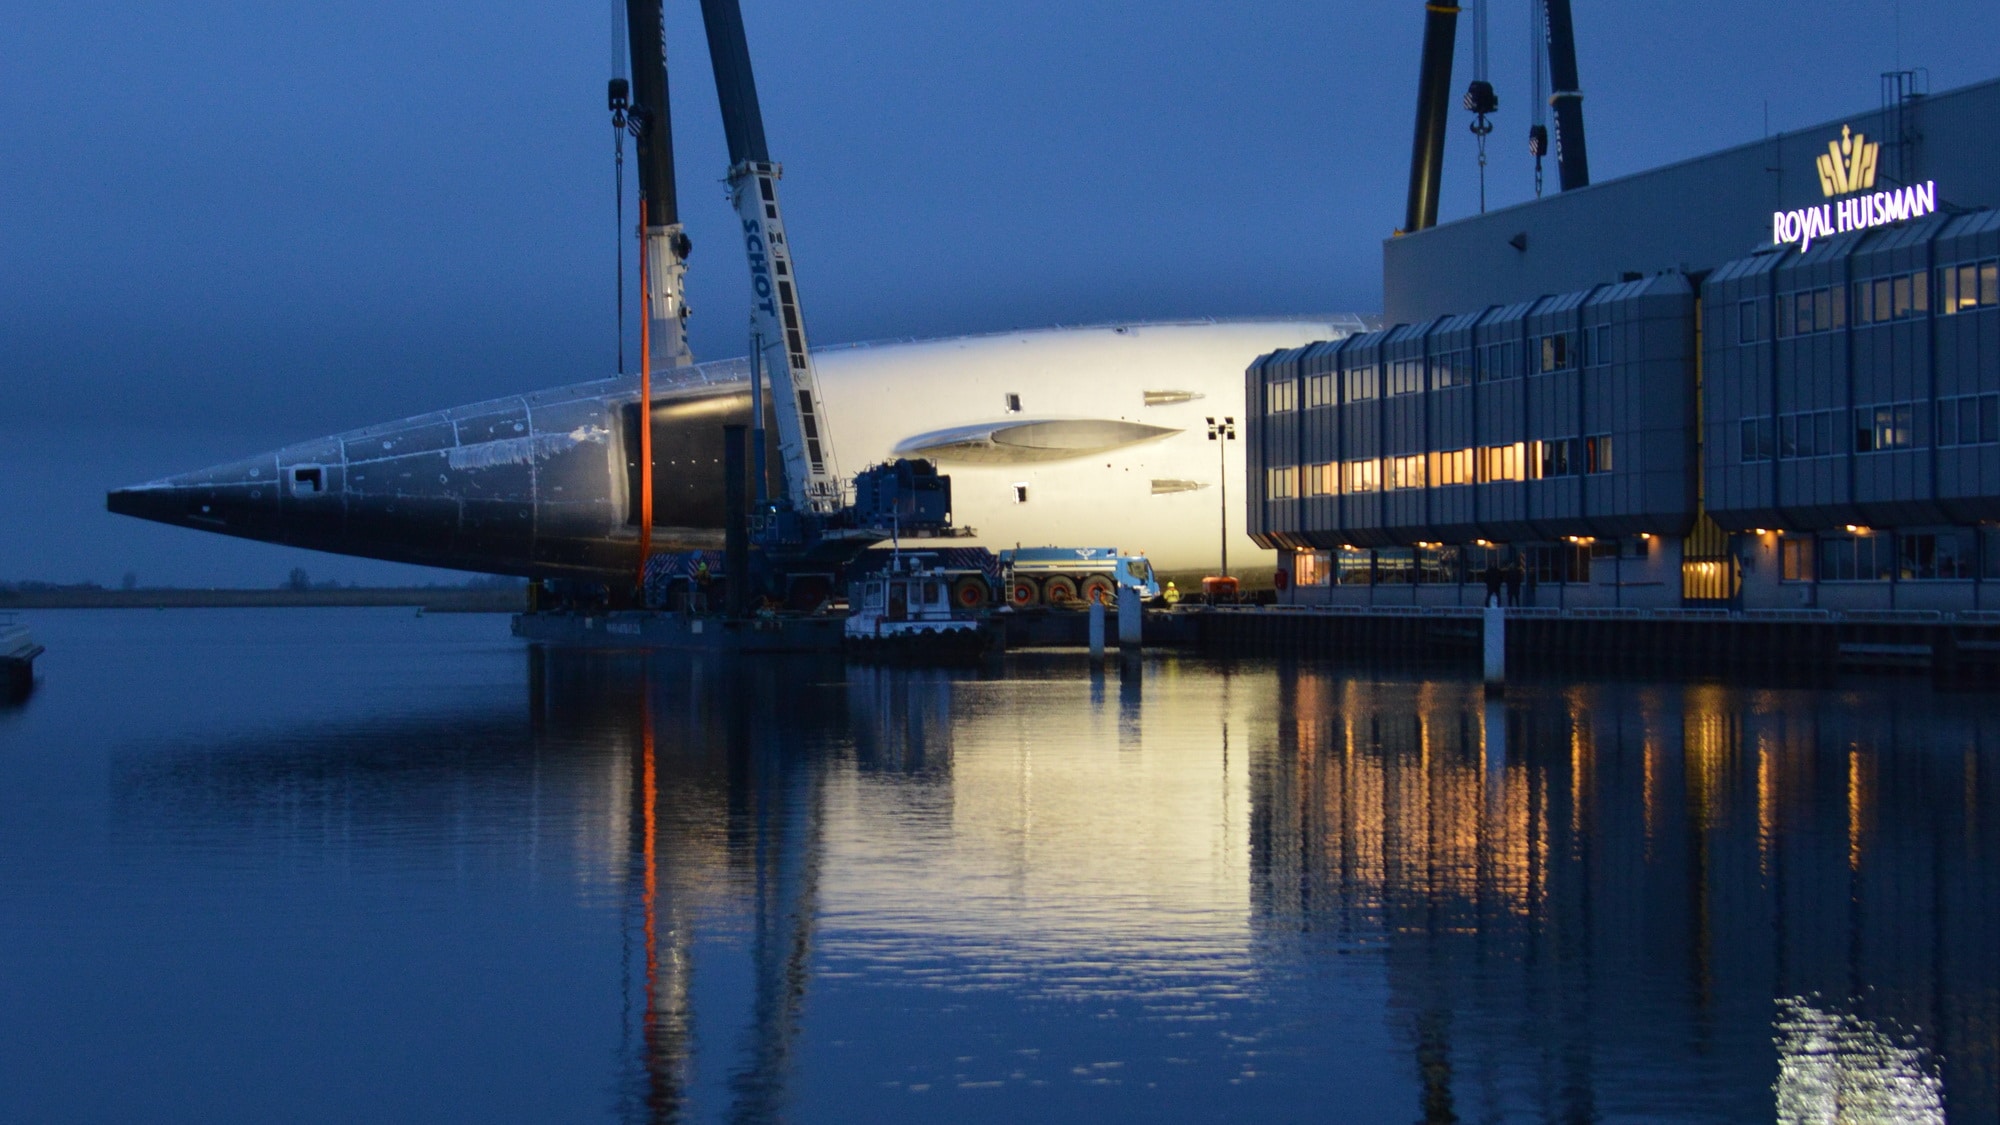 ROYAL HUISMAN TURNS ITS LARGEST HULL EVER